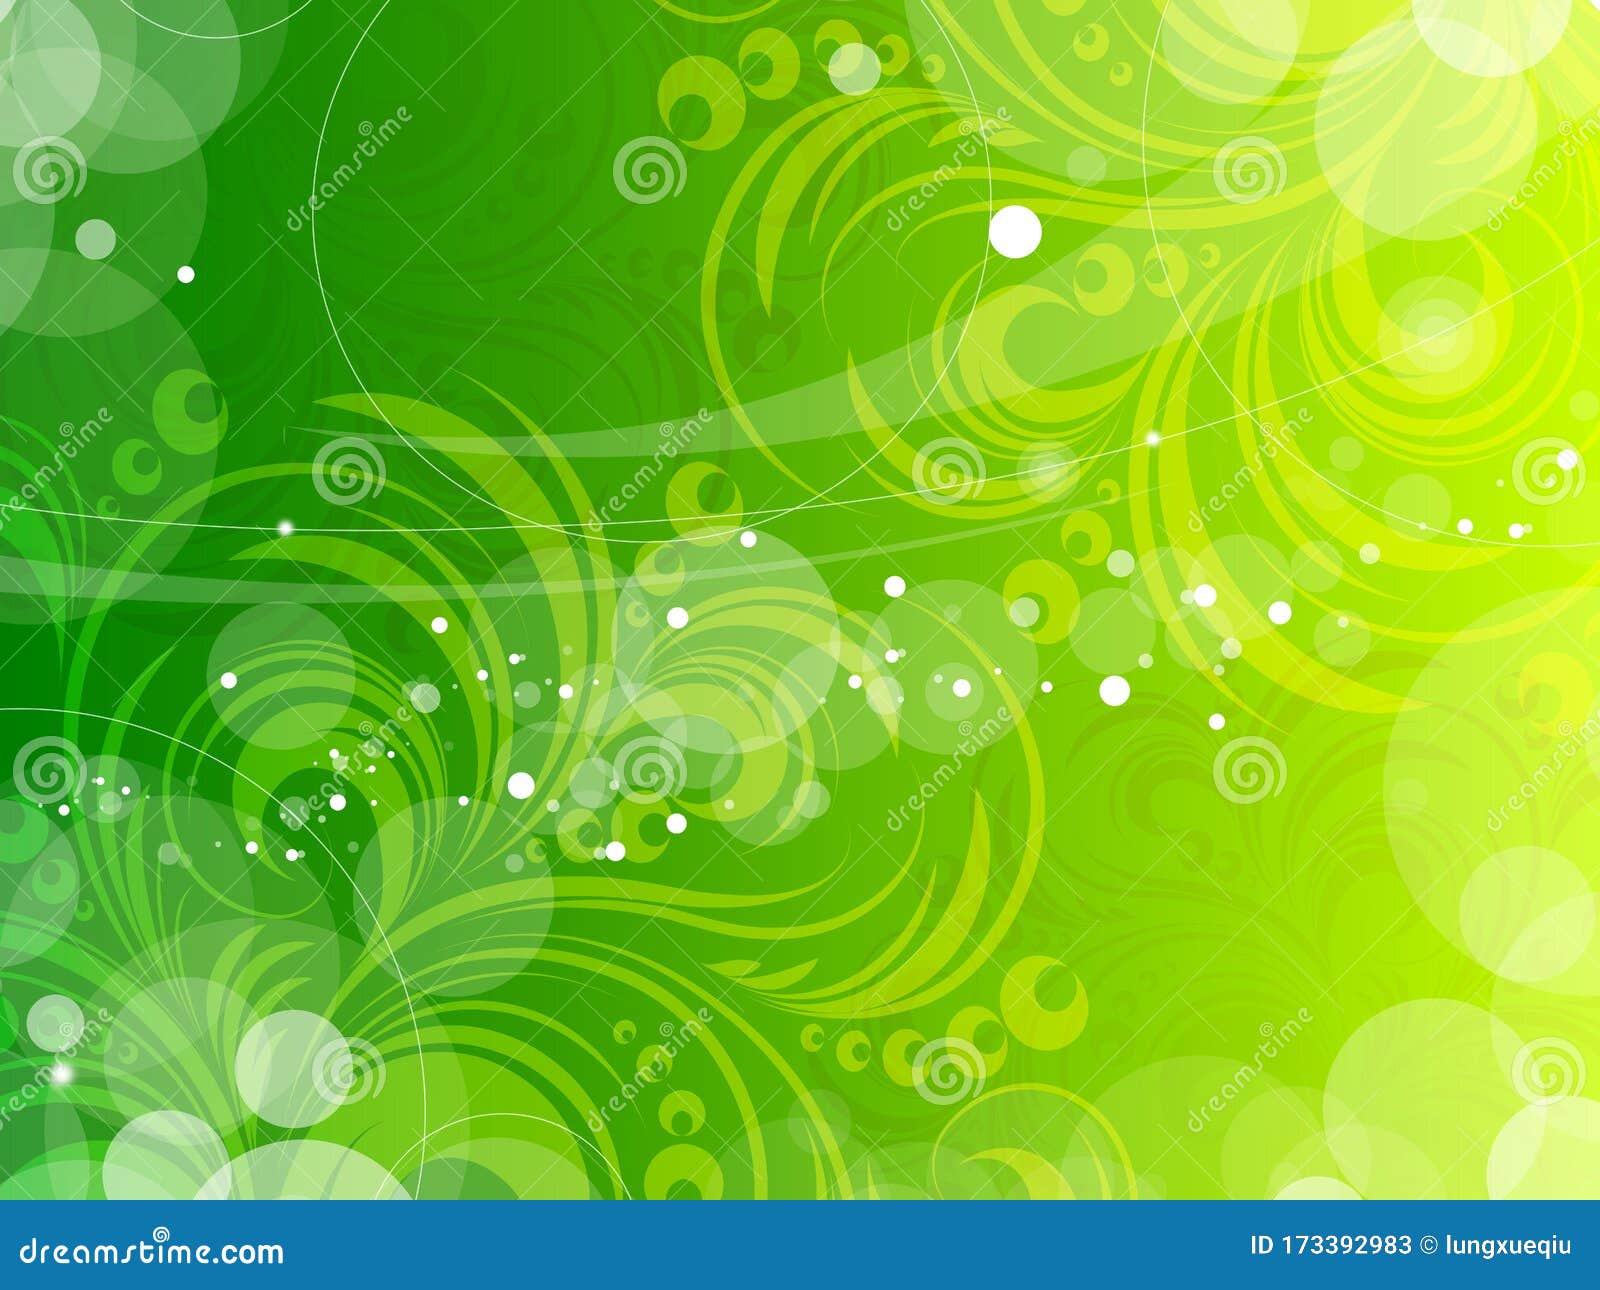 Floral Flower Green Yellow Nature Mystic Abstract Pattern Texture Beautiful Background  Wallpaper Stock Illustration - Illustration of ethnic, beautiful: 173392983